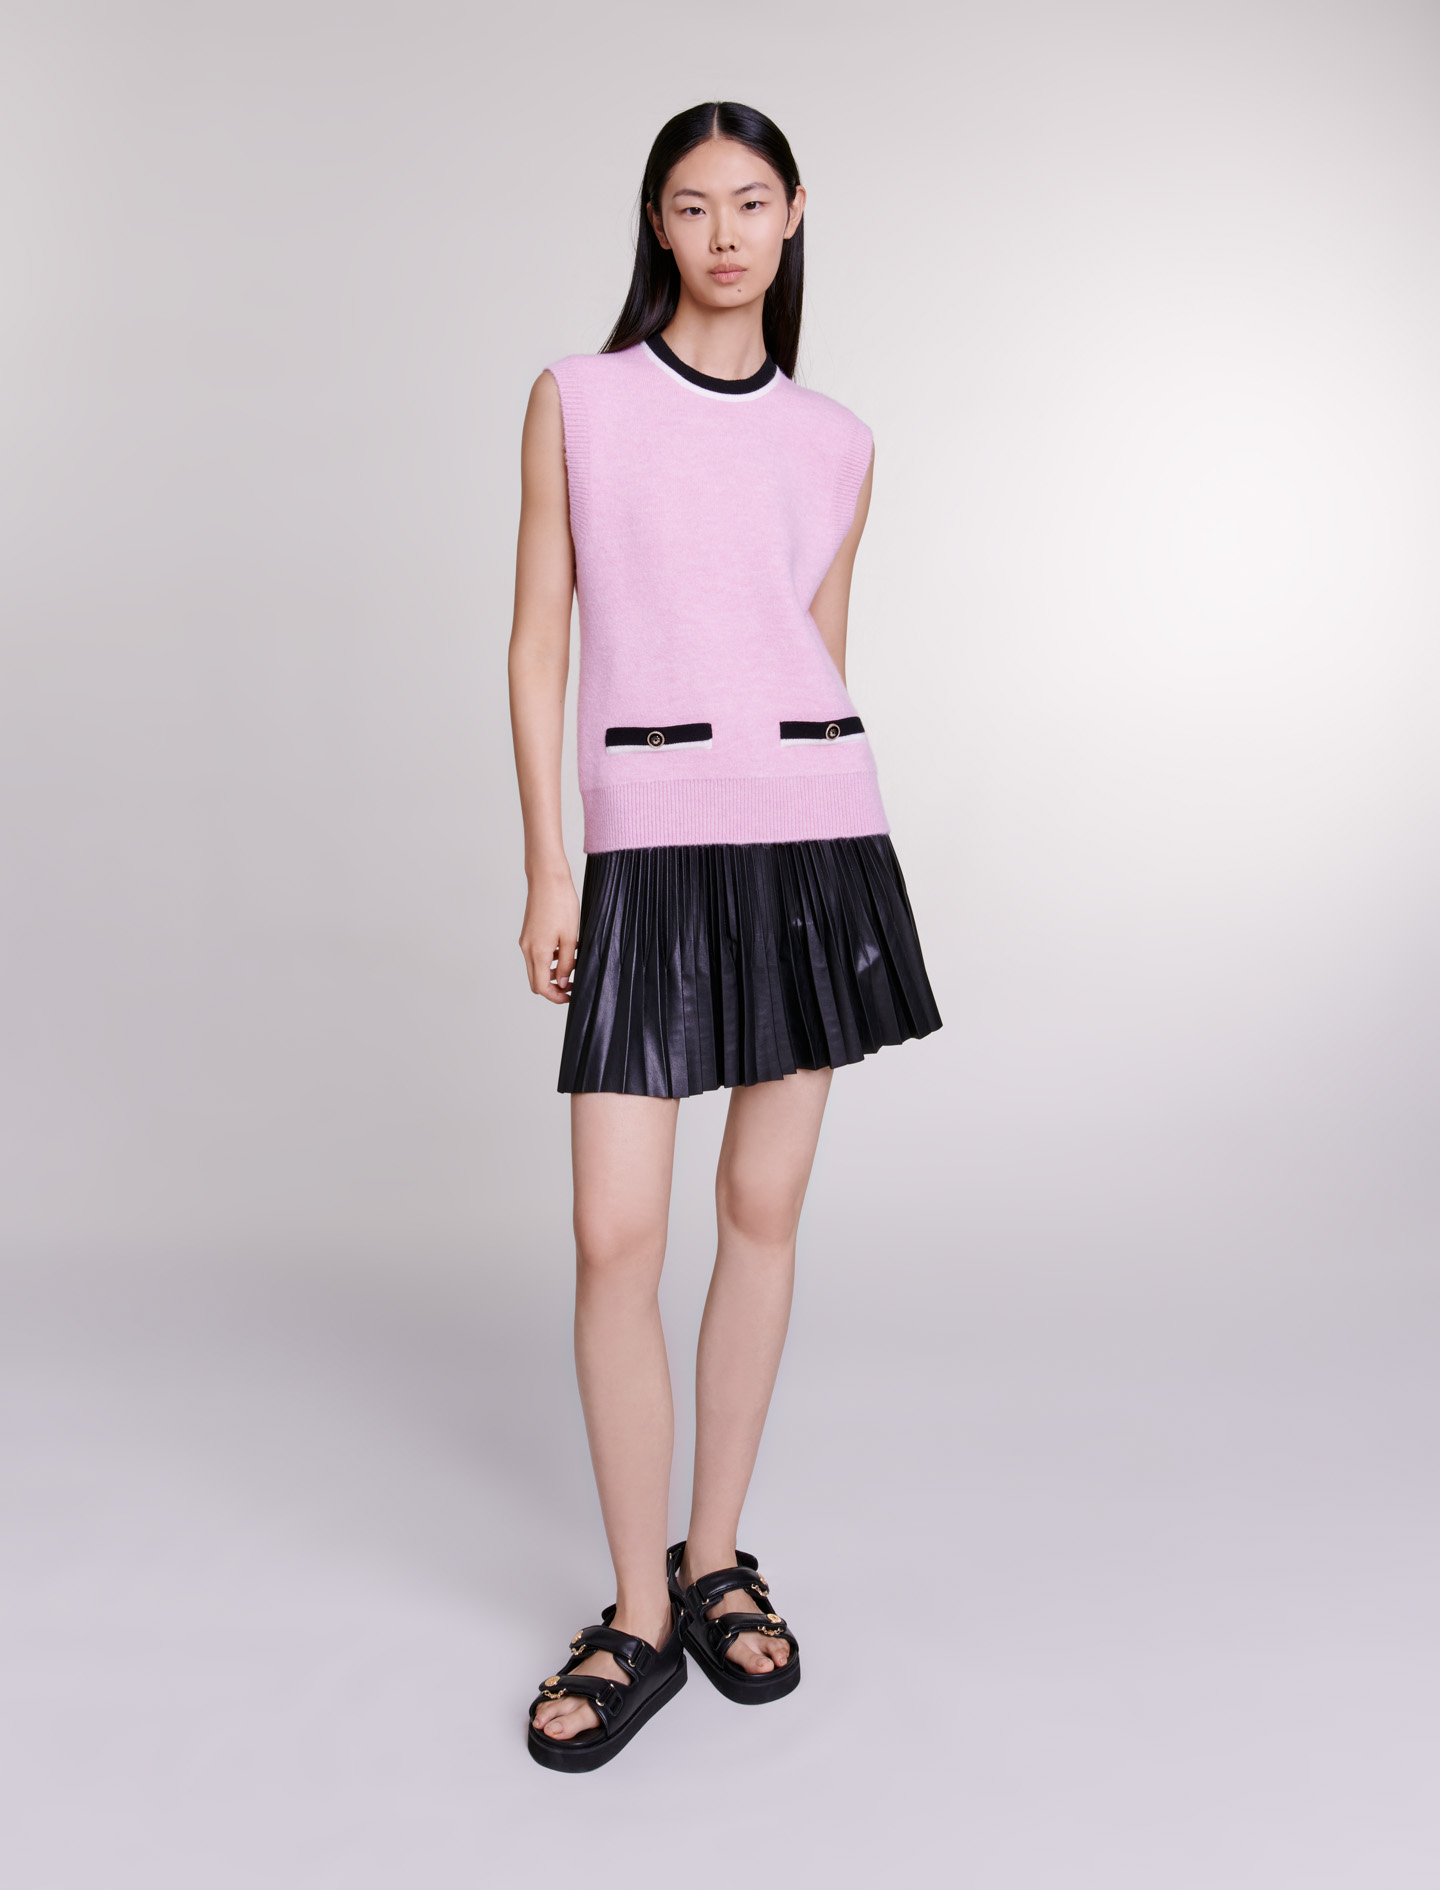 Maje Woman's acrylic, Sleeveless jumper for Spring/Summer, in color pink /